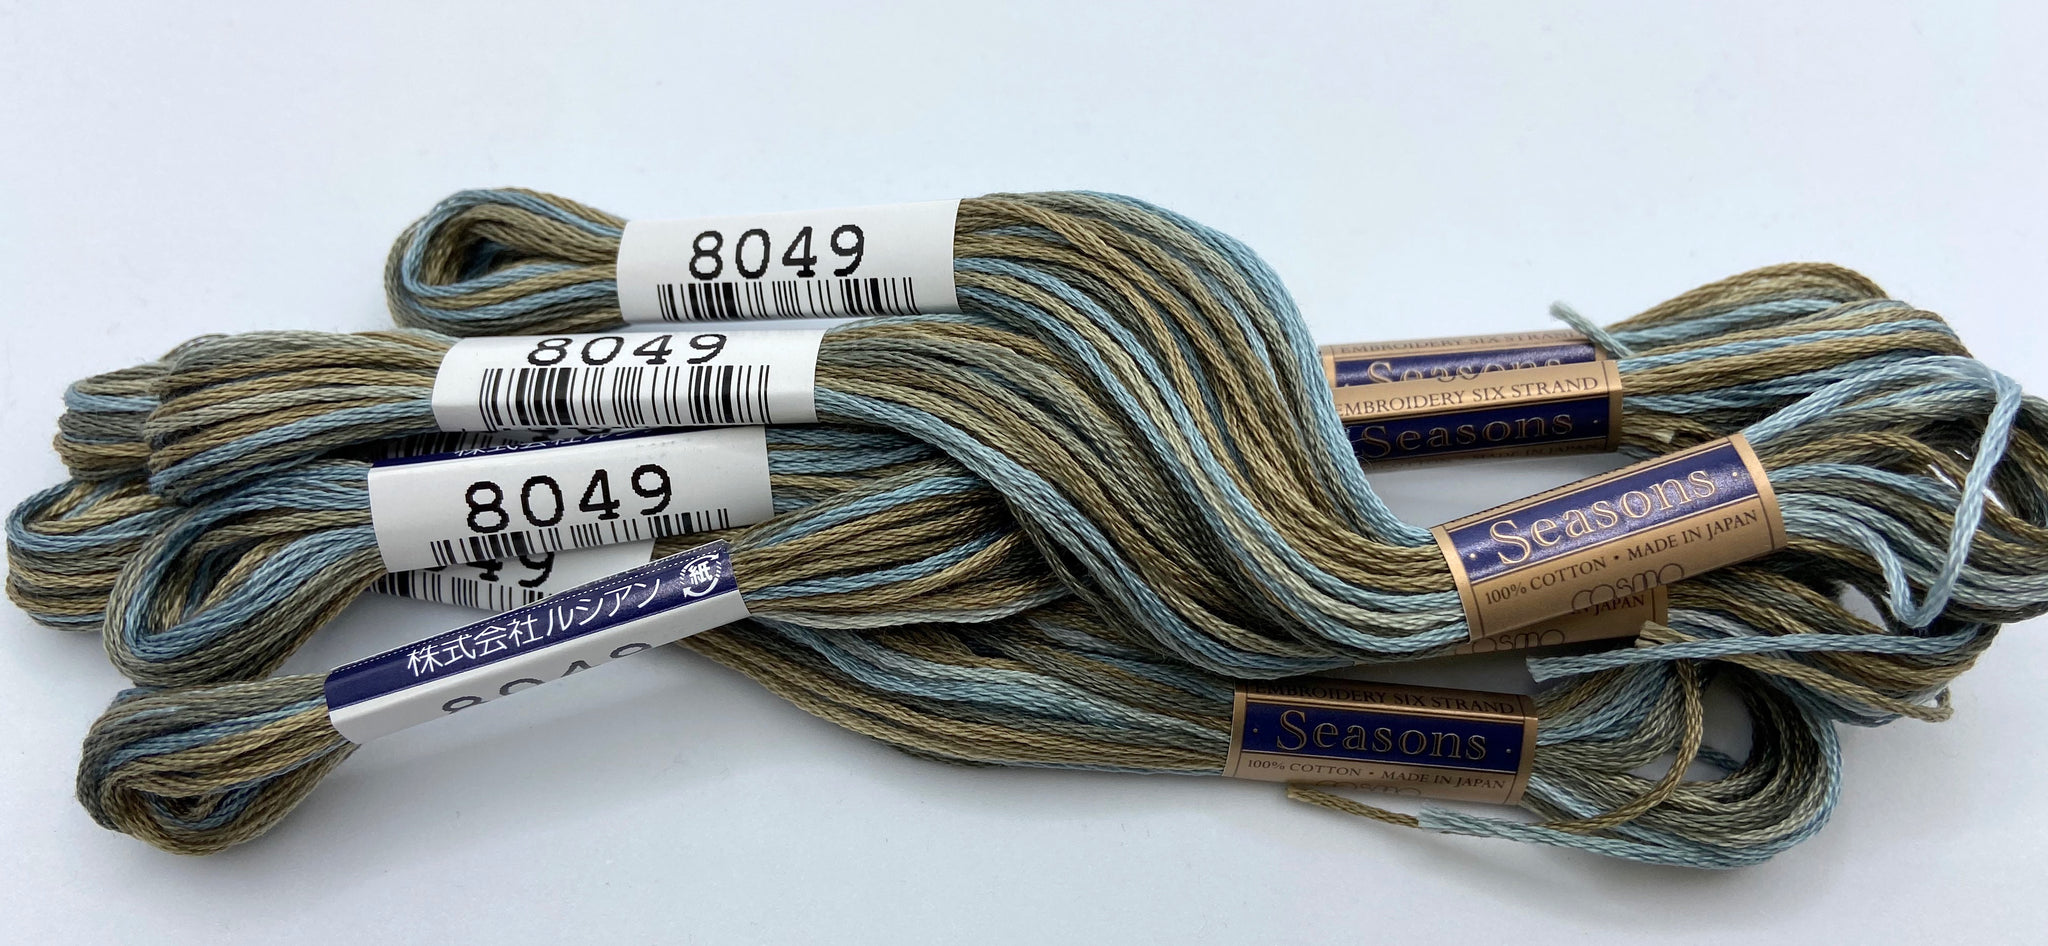 Cosmo Seasons Variegated Embroidery Floss Set - 5021-5040